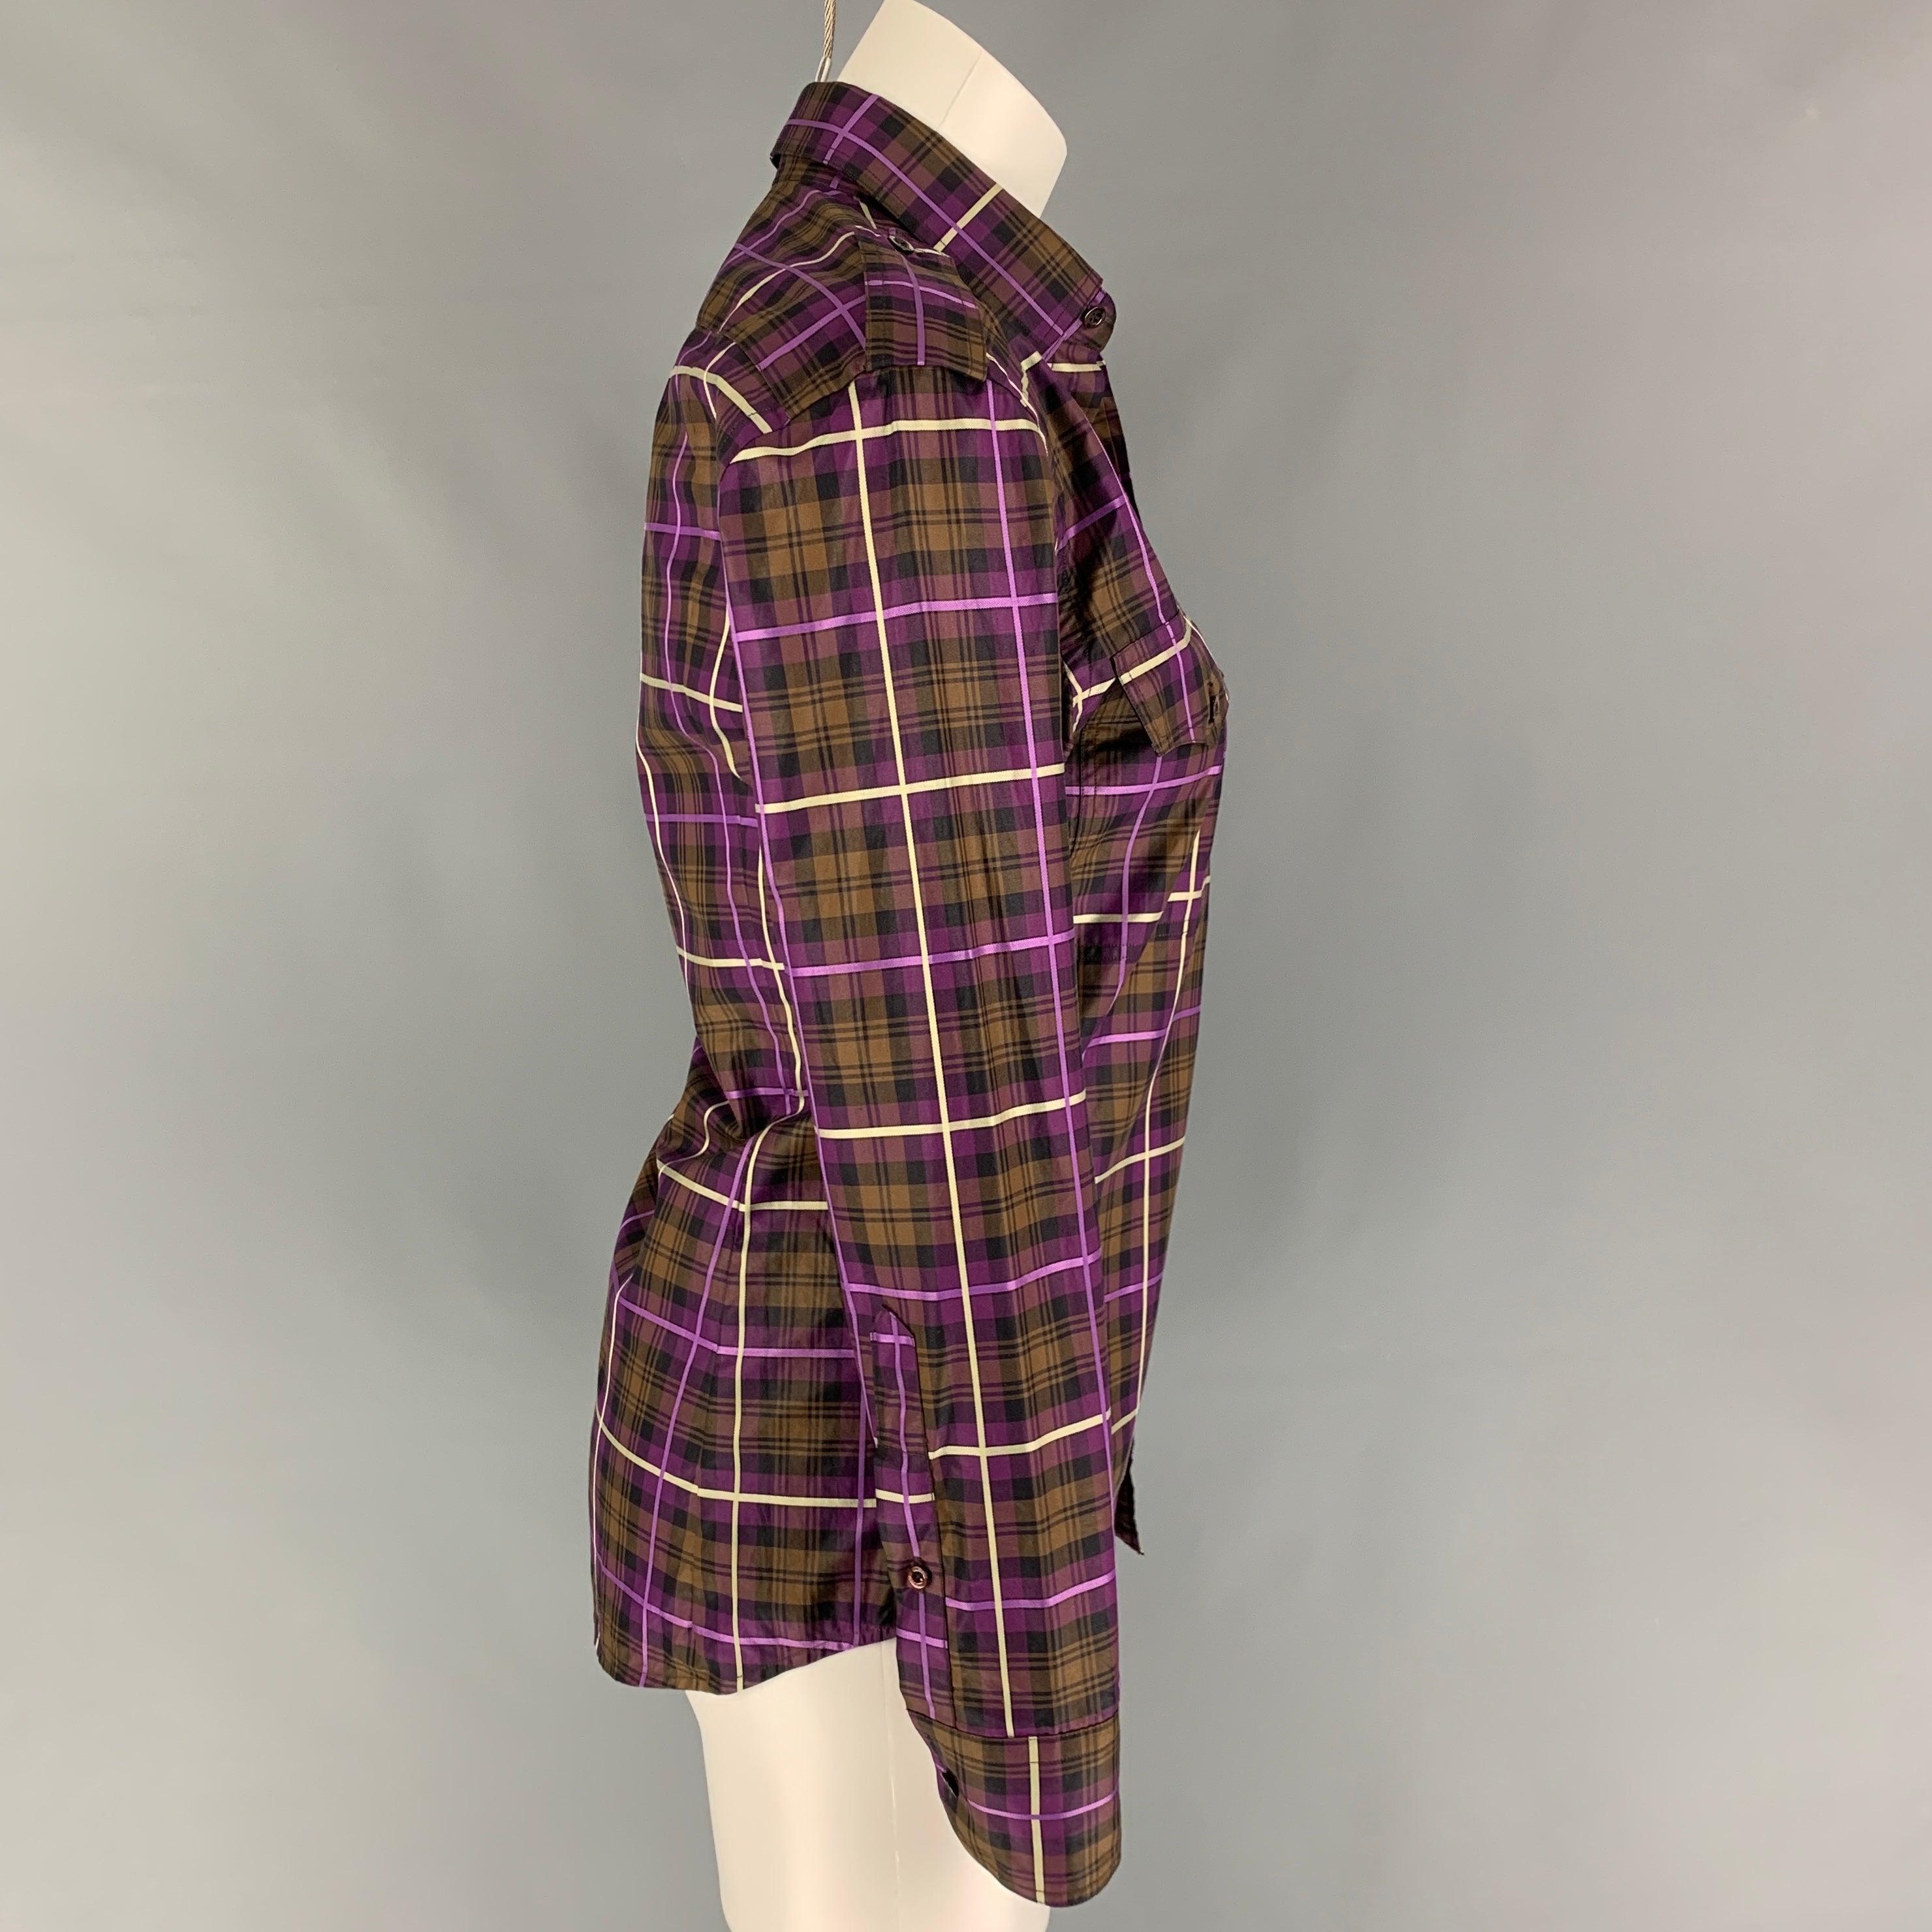 GUCCI long sleeve shirt comes in a purple & brown plaid cotton featuring epaulettes, front pockets, spread collar, and a button up closure. Made in Italy.
Very Good
Pre-Owned Condition.  

Marked:   37/14.5 

Measurements: 
 
Shoulder: 16.5 inches 